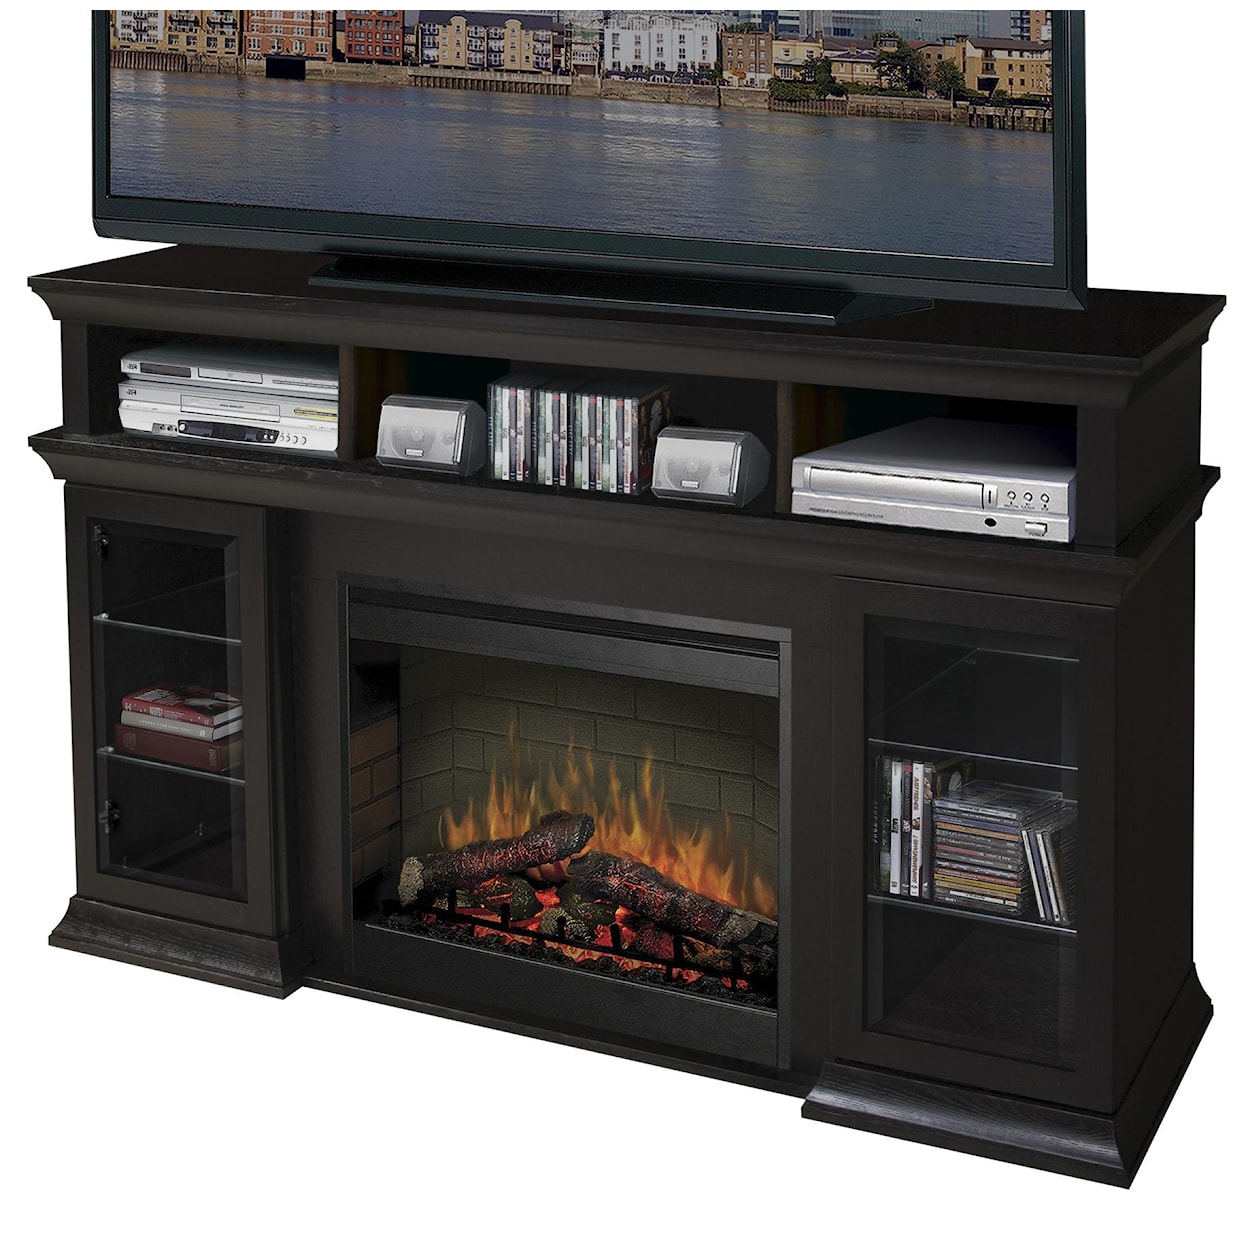 Dimplex Media Console Fireplaces Bennett Media Console Fireplace with Logs